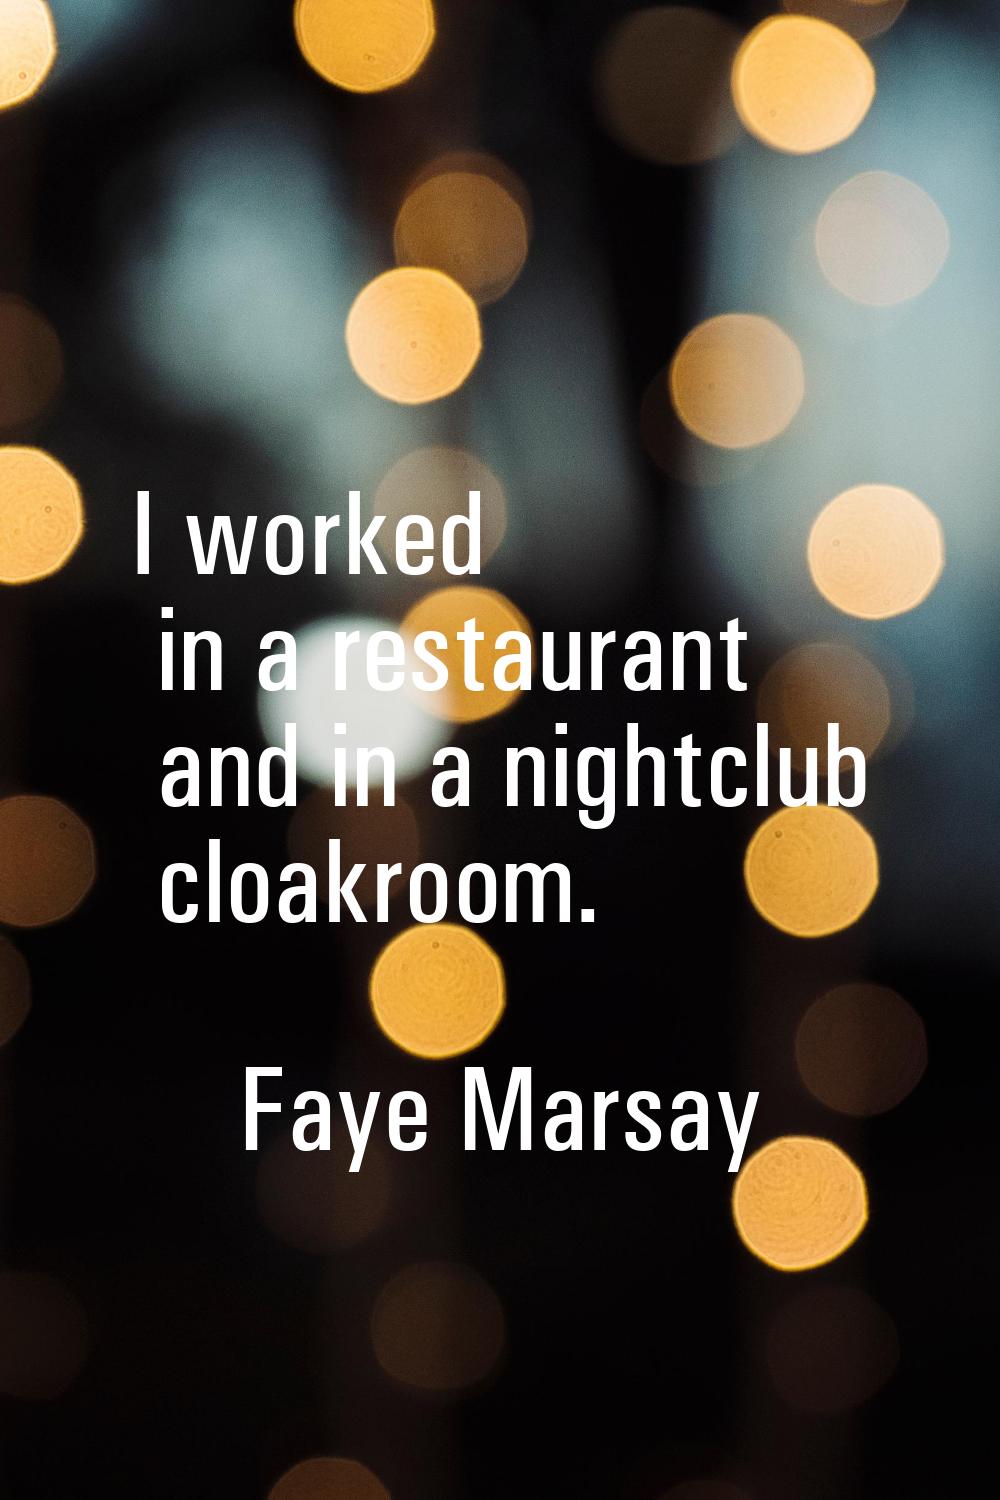 I worked in a restaurant and in a nightclub cloakroom.